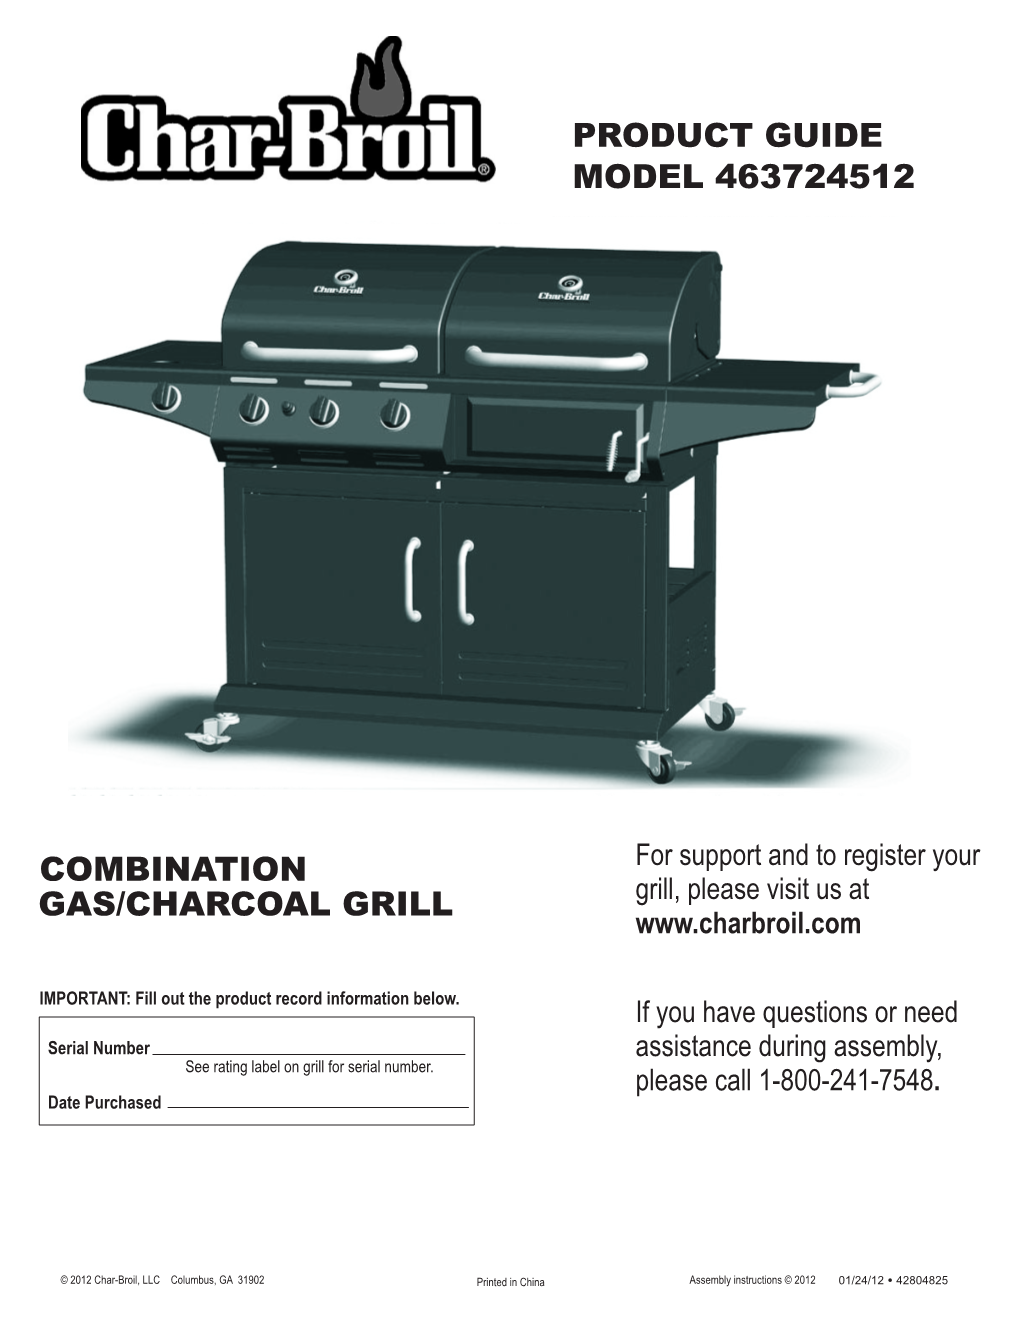 Product Guide Model 463724512 Combination Gas/Charcoal Grill